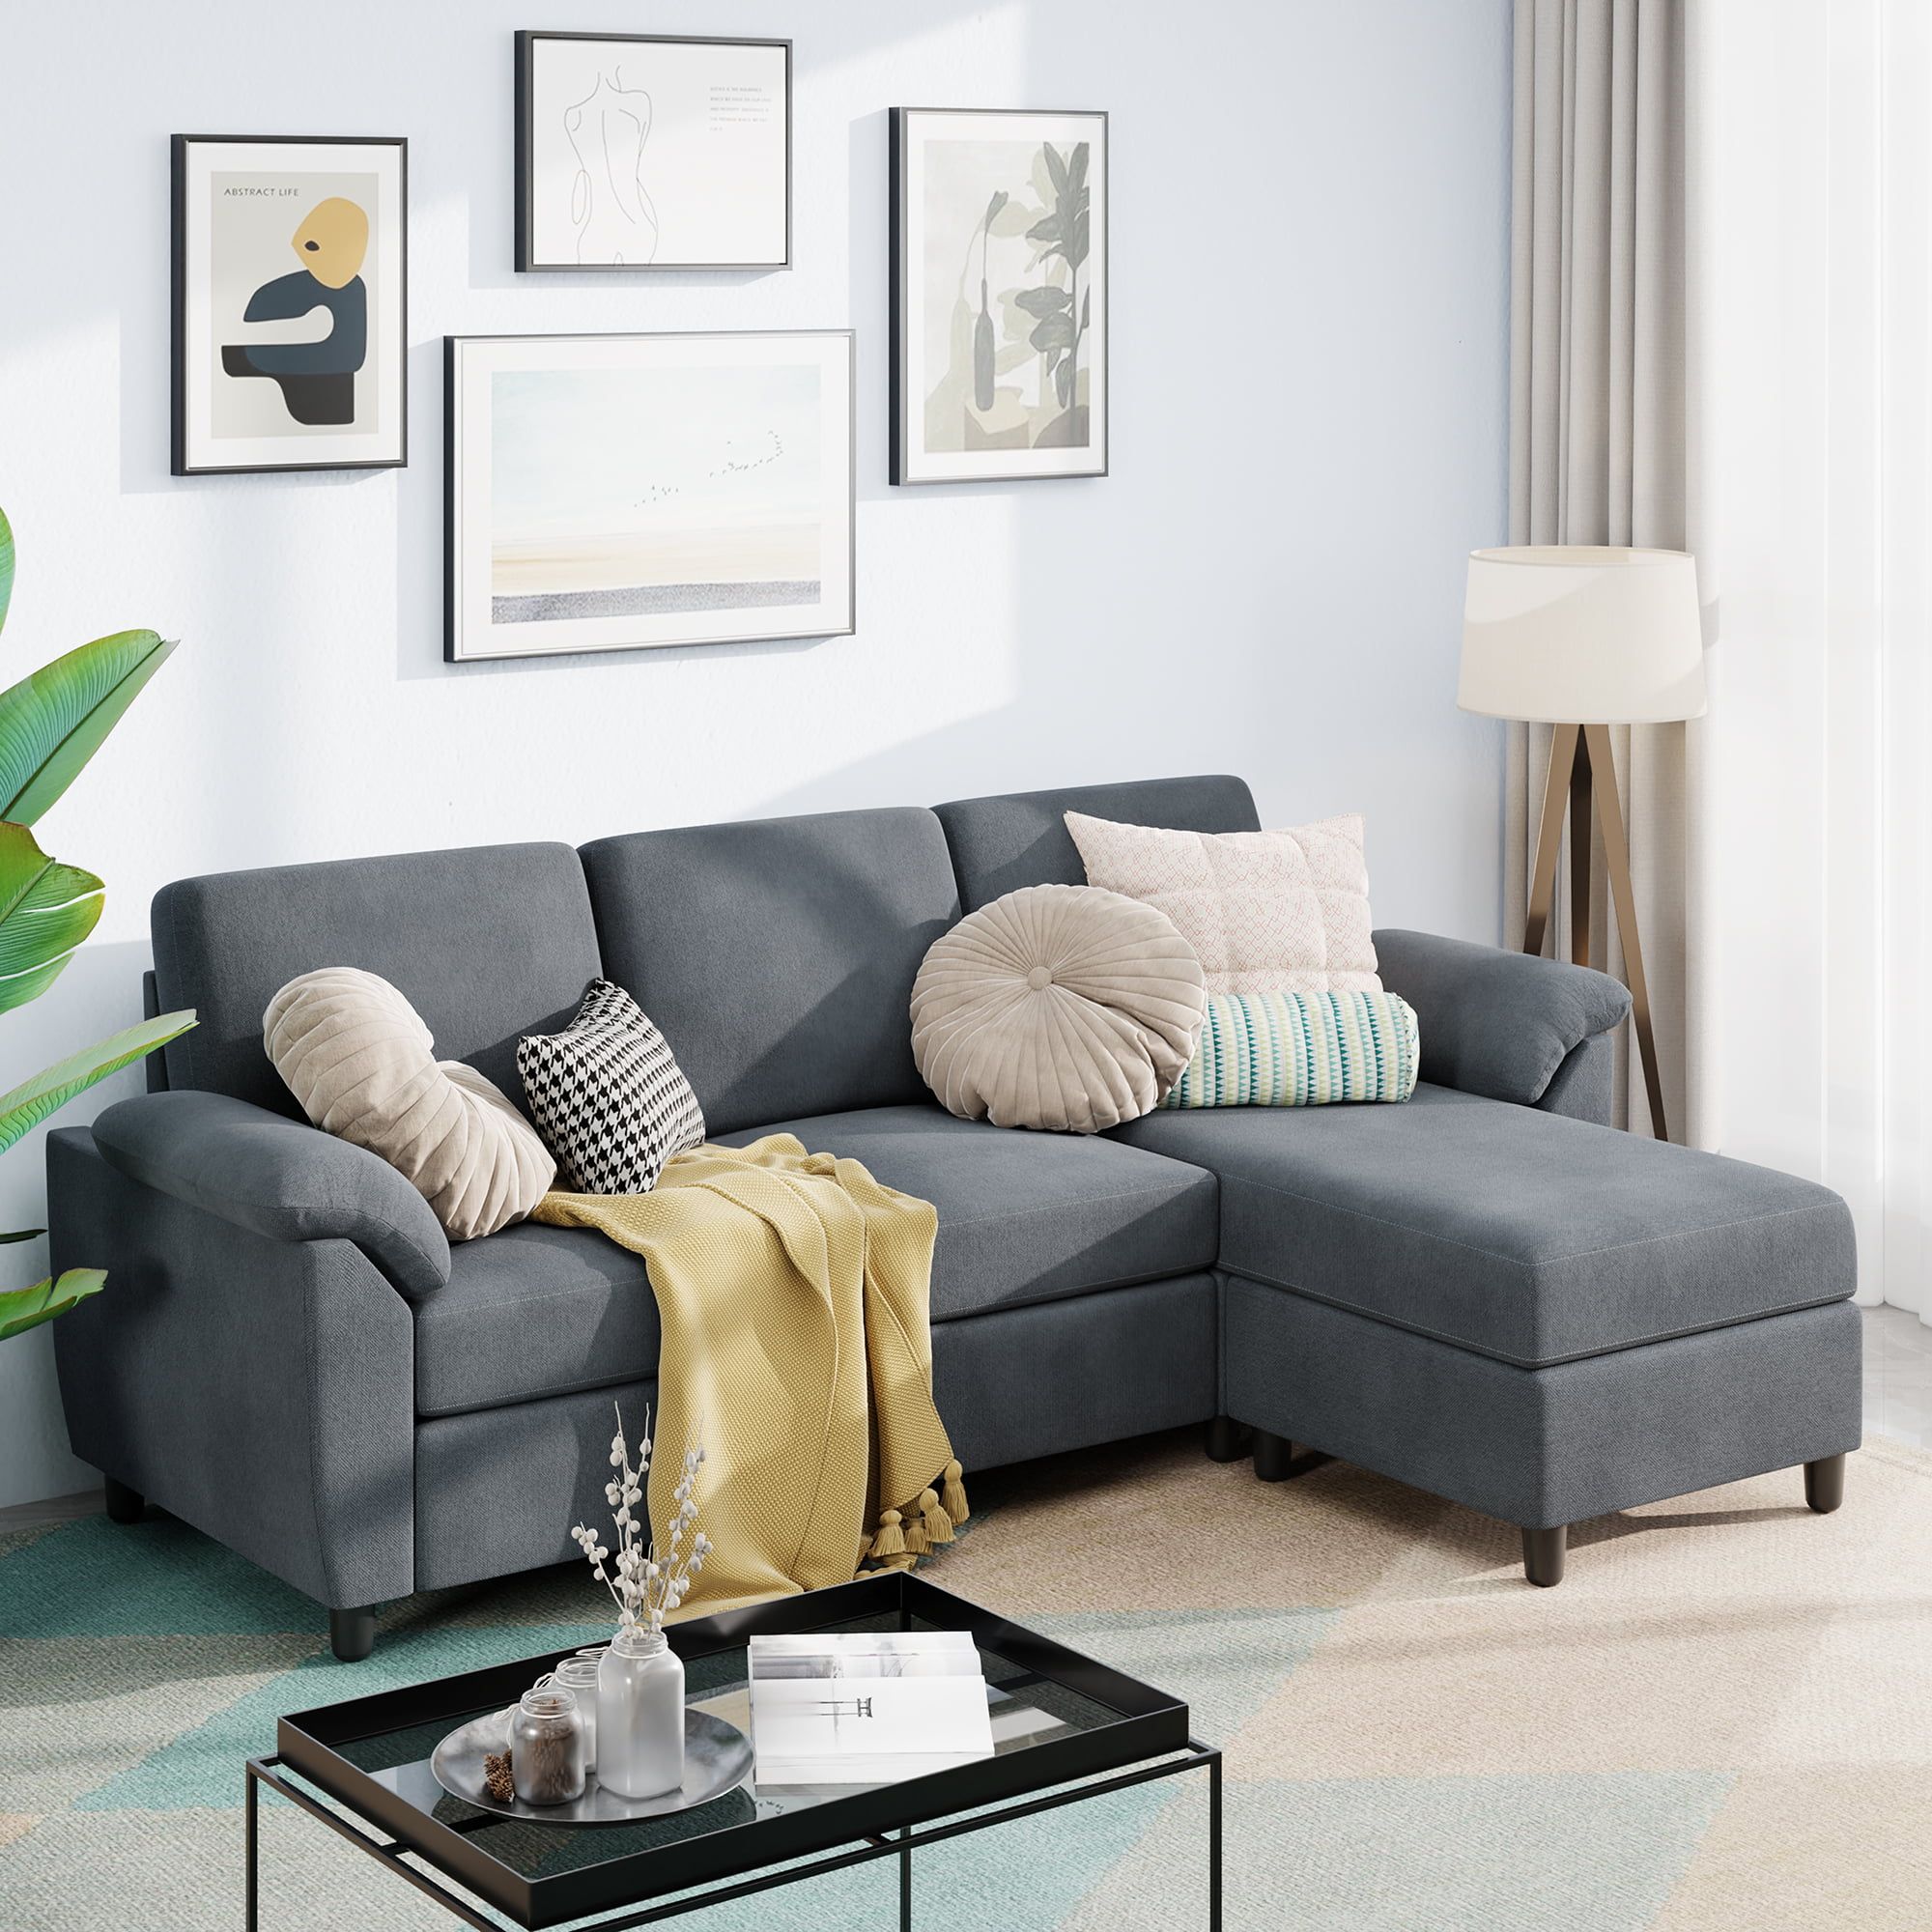 Sobaniilo 79" Convertible Sectional Sofa Couch, 3 Seat L Shaped Sofa With  Removable Pillows Linen Fabric Small Couch Mid Century For Living Room,  Apartment And Office (gray) – Walmart In L Shapped Apartment Sofas (View 5 of 20)